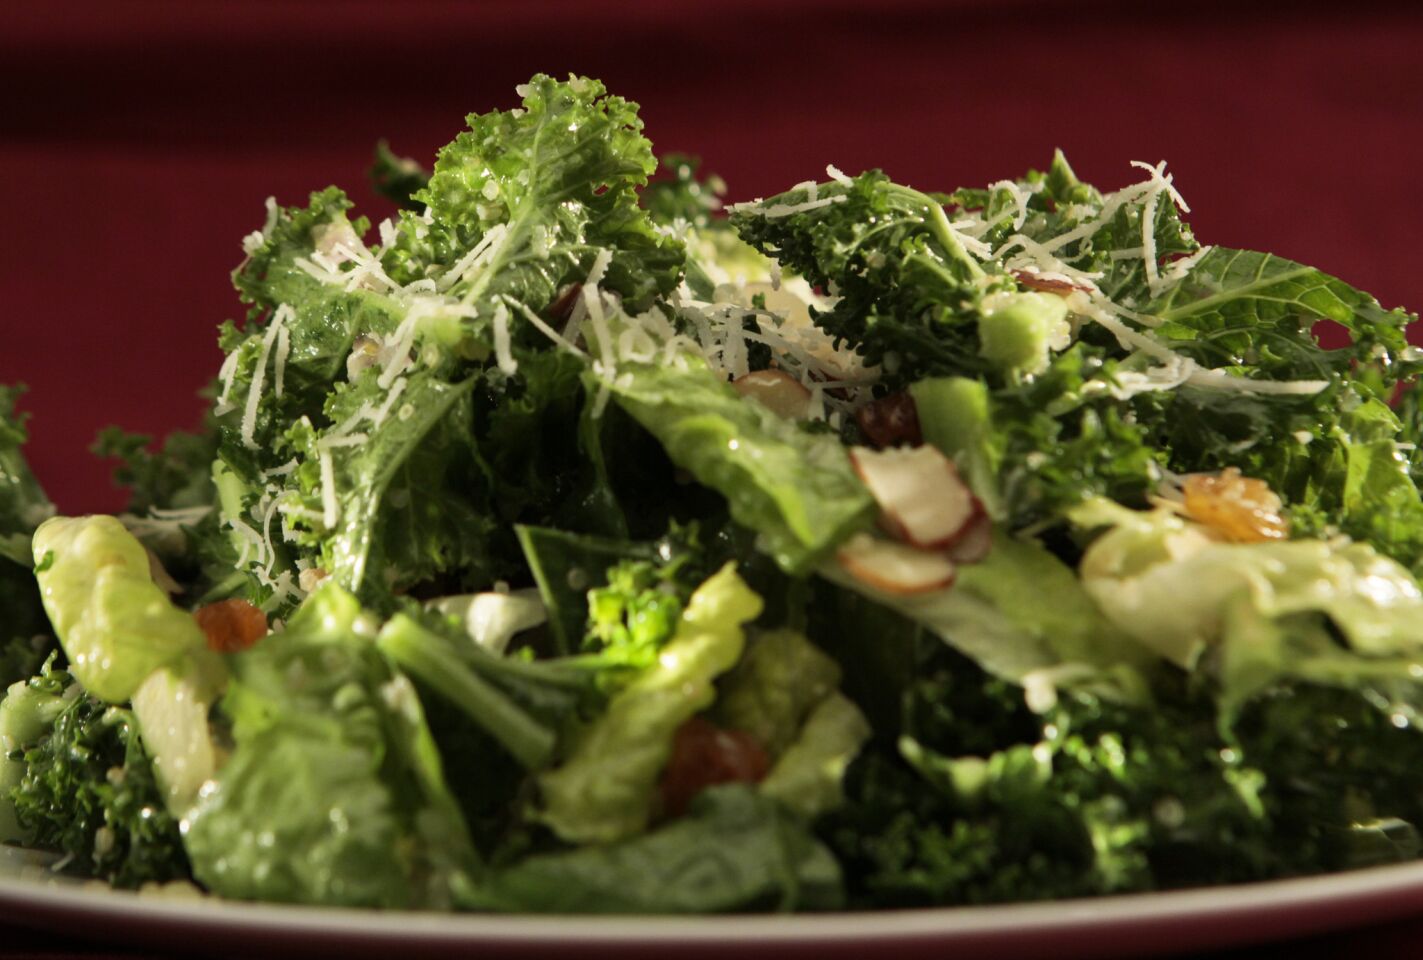 The kale salad from Napa Valley Grille. Recipe here.